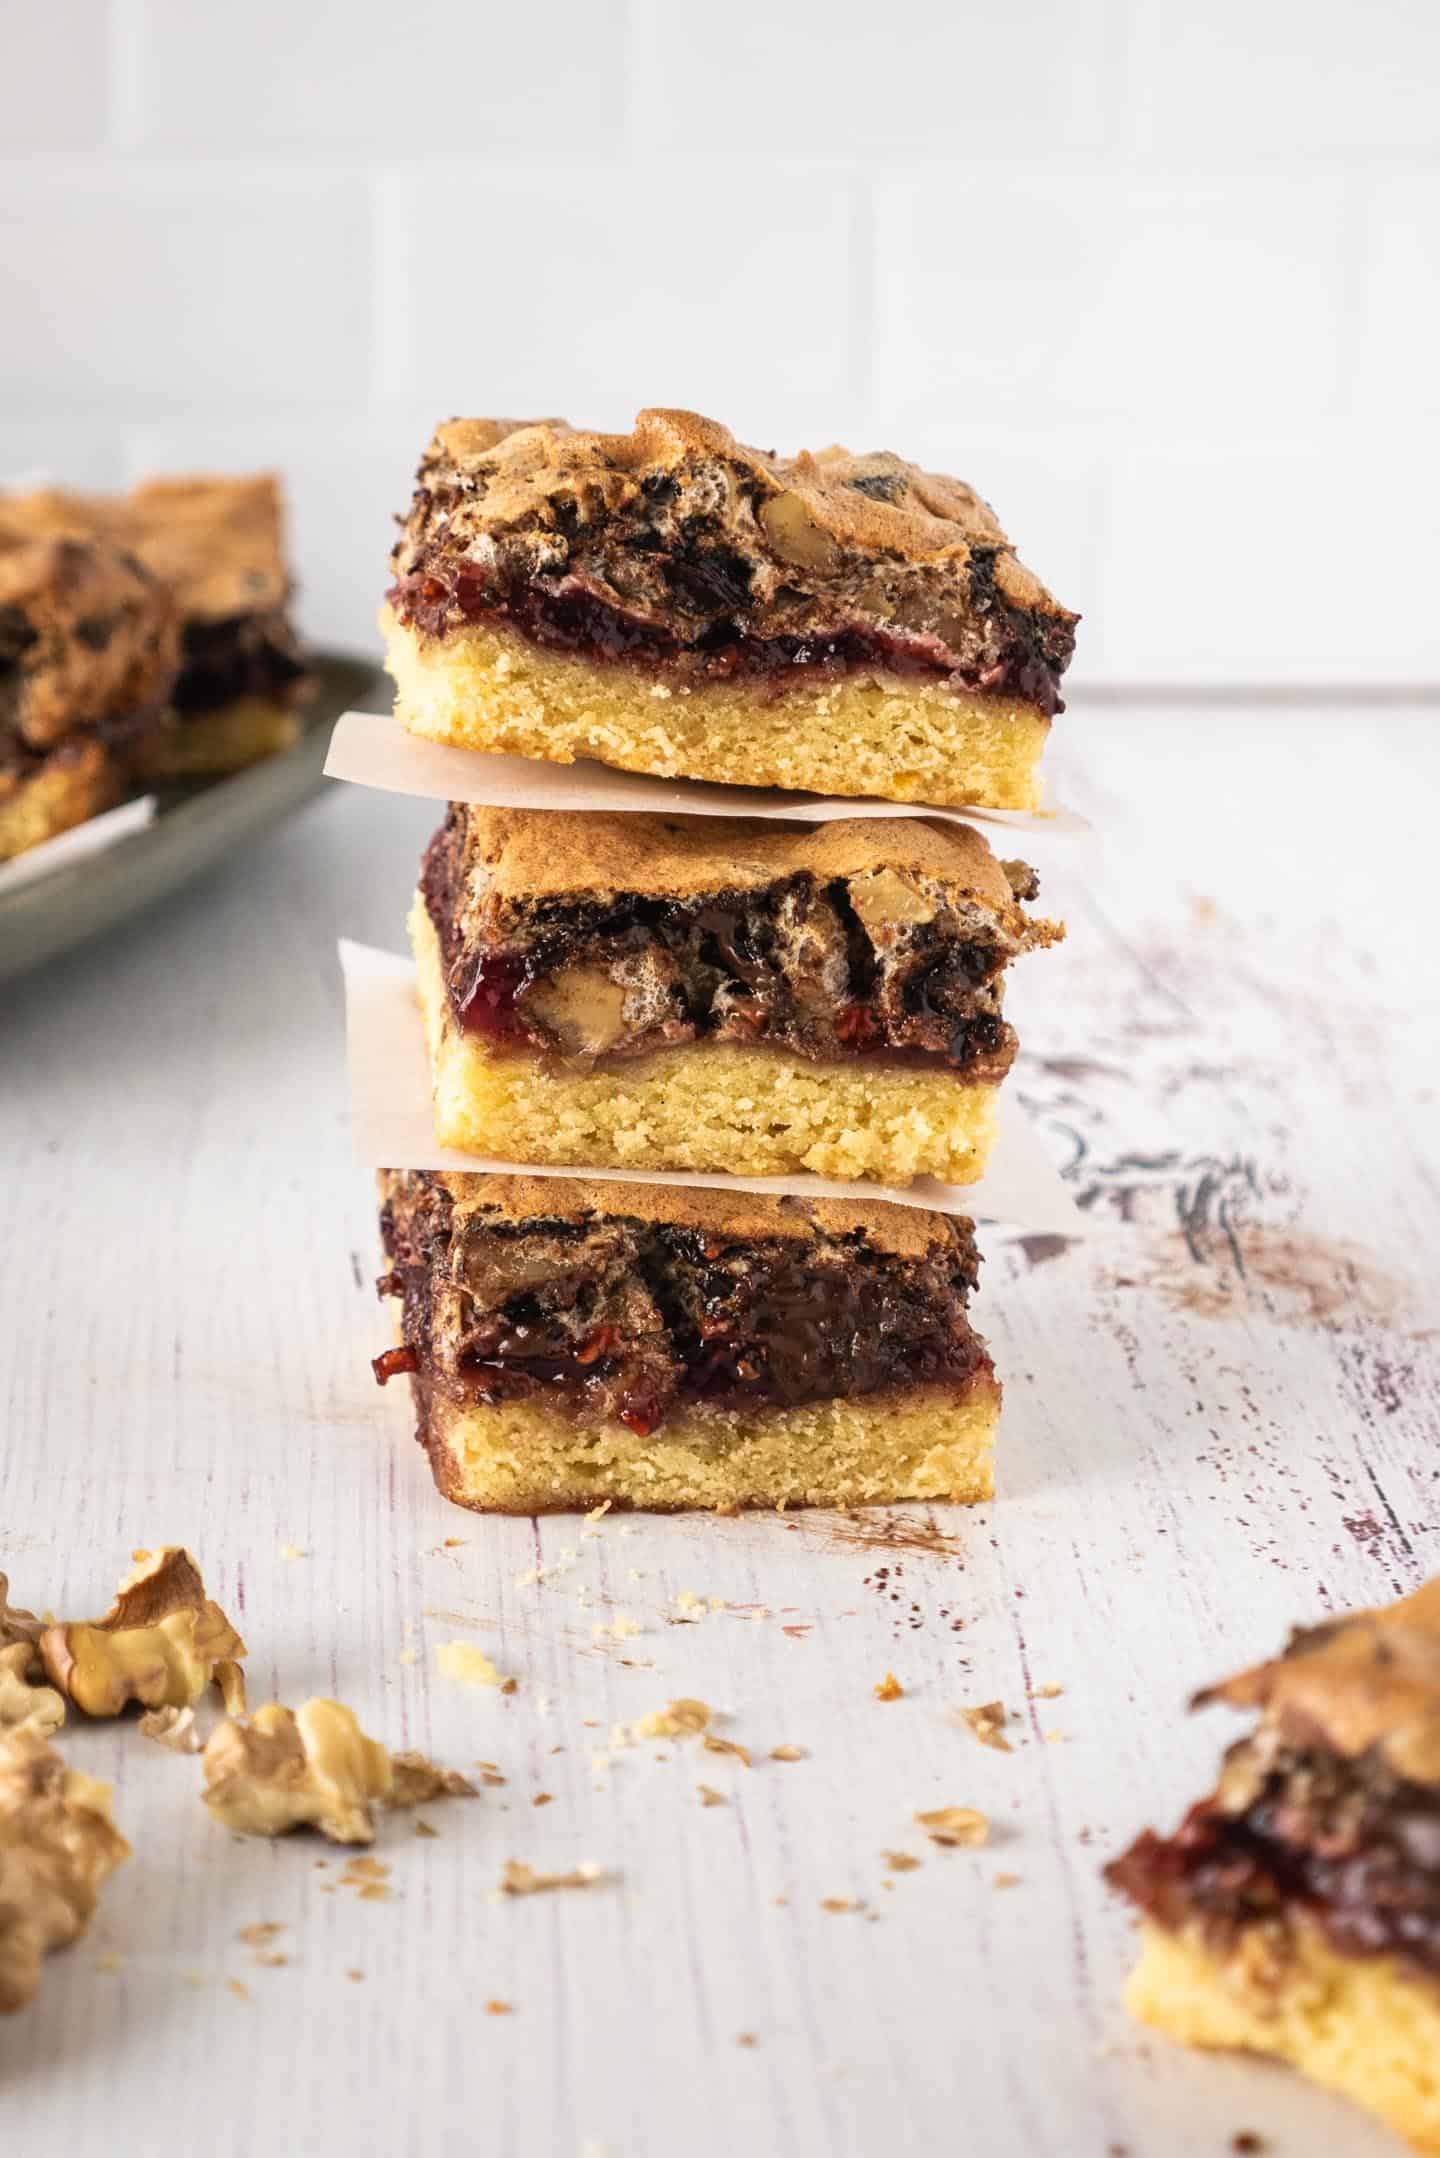 Three square raspberry bars with chocolate and walnuts meringue, and a plate with more tart at the back